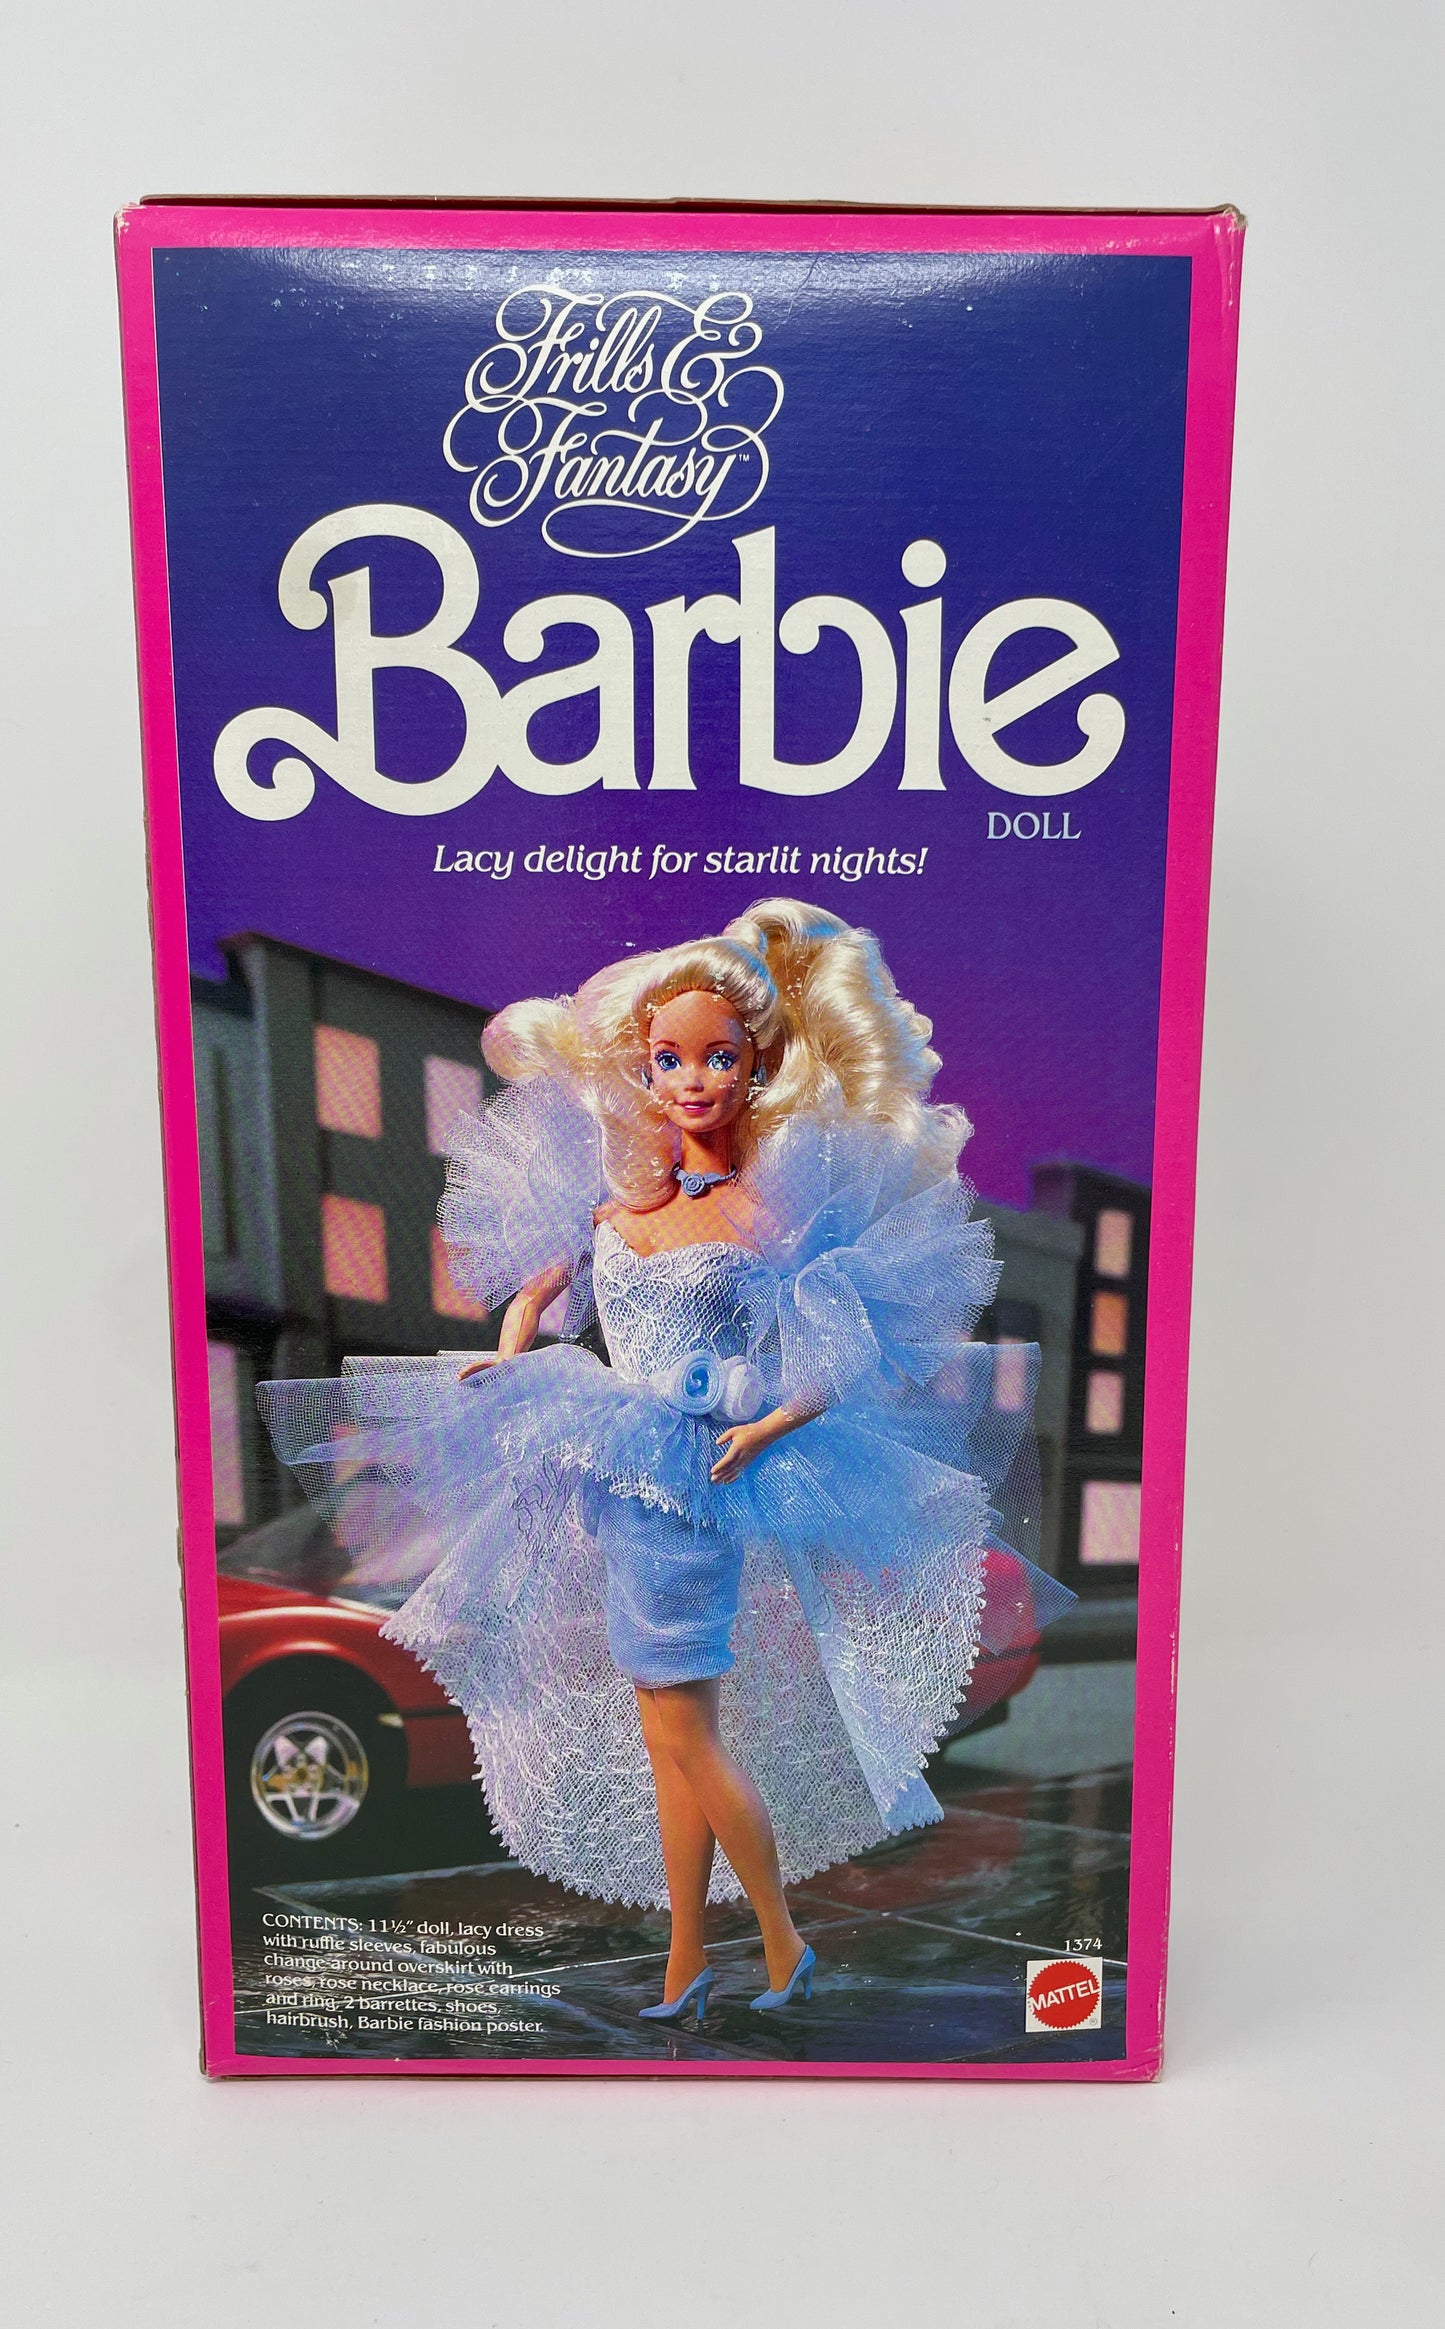 BARBIE - FRILLS AND FANTASY BARBIE *SPECIAL WAL MART LIMITED EDITION - MATTEL 1988